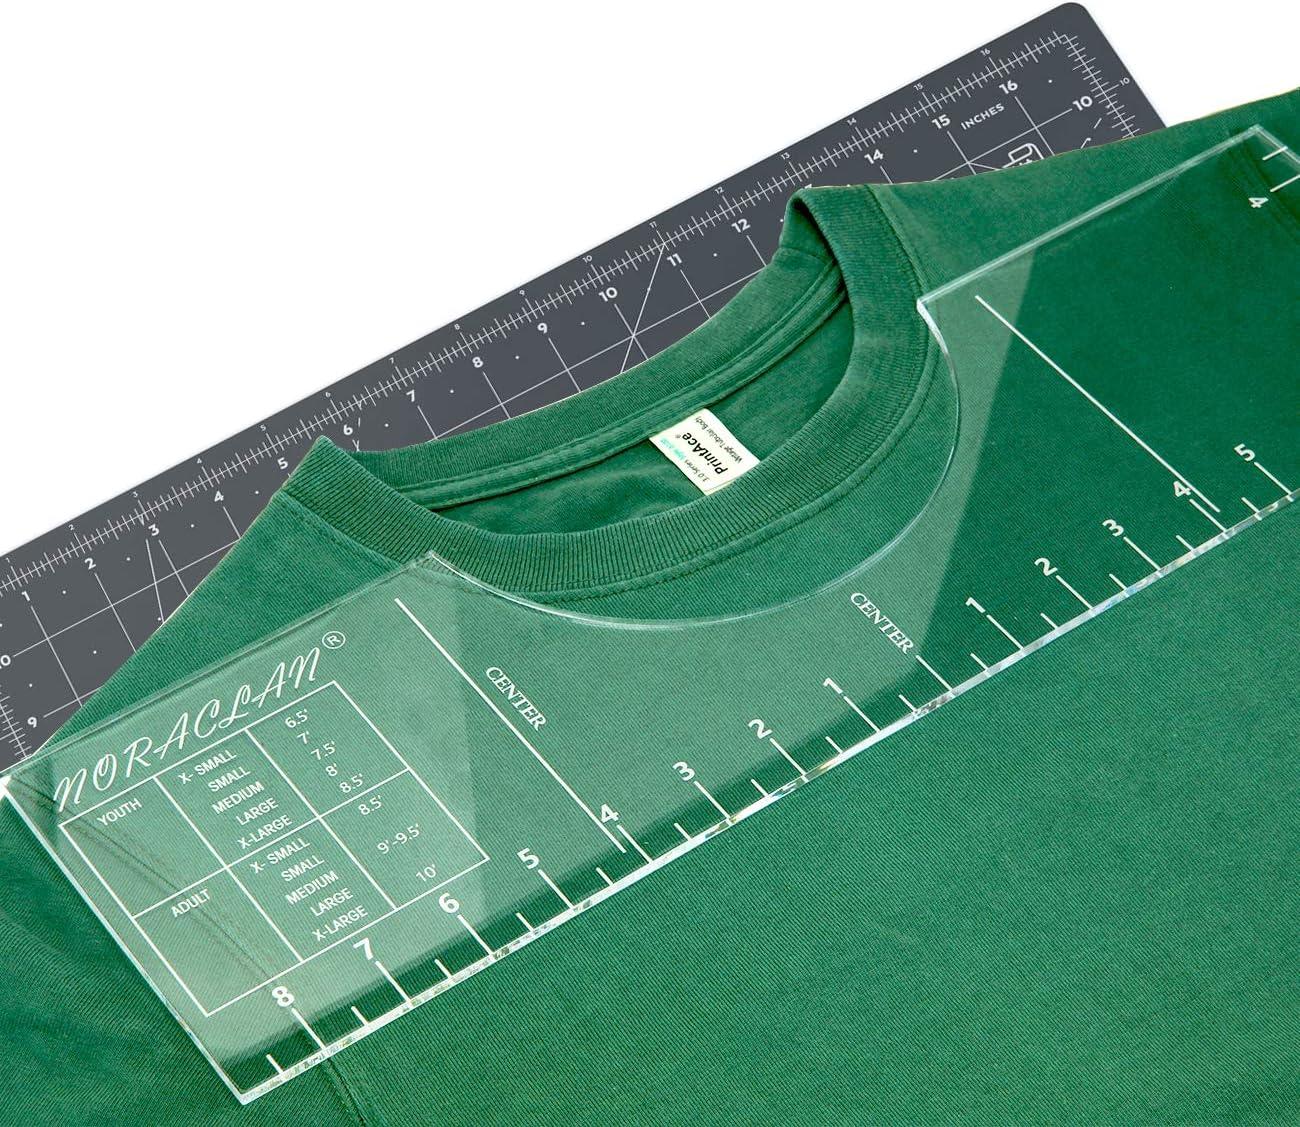 SKYG Tshirt Ruler Guide for Vinyl- Tshirt Alignment Tool- T shirt Rulers to  Center Designs - Acrylic, Transparent Rulers for Vinyl Press, Screen